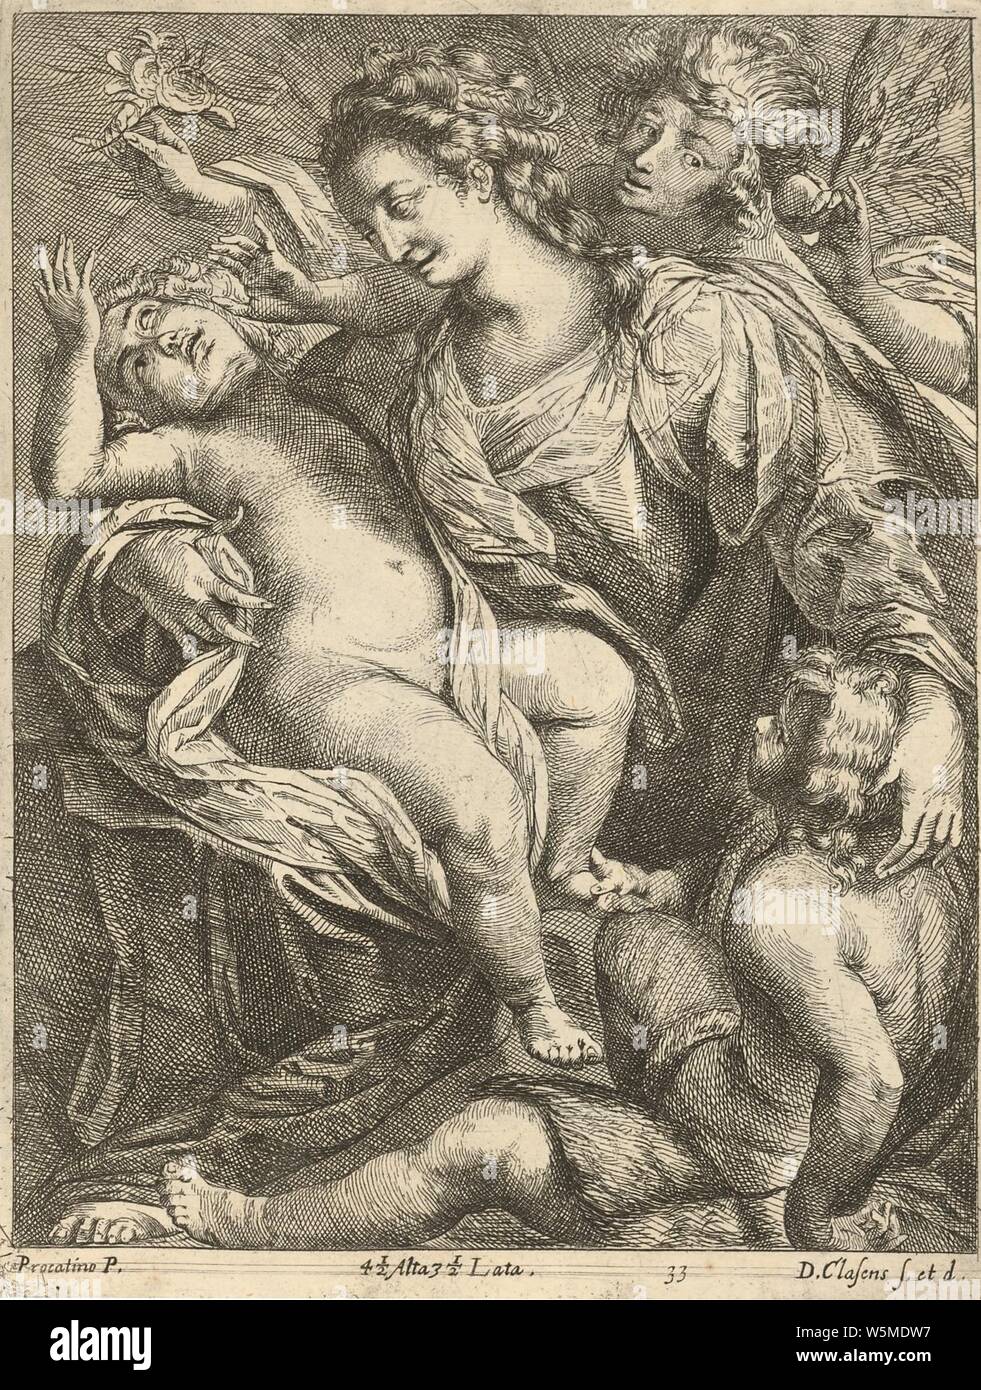 D Clasens after Procaccini - Virgin and Child accompanied by St John and an Angel SVK-SNG.G 11965-34. Stock Photo